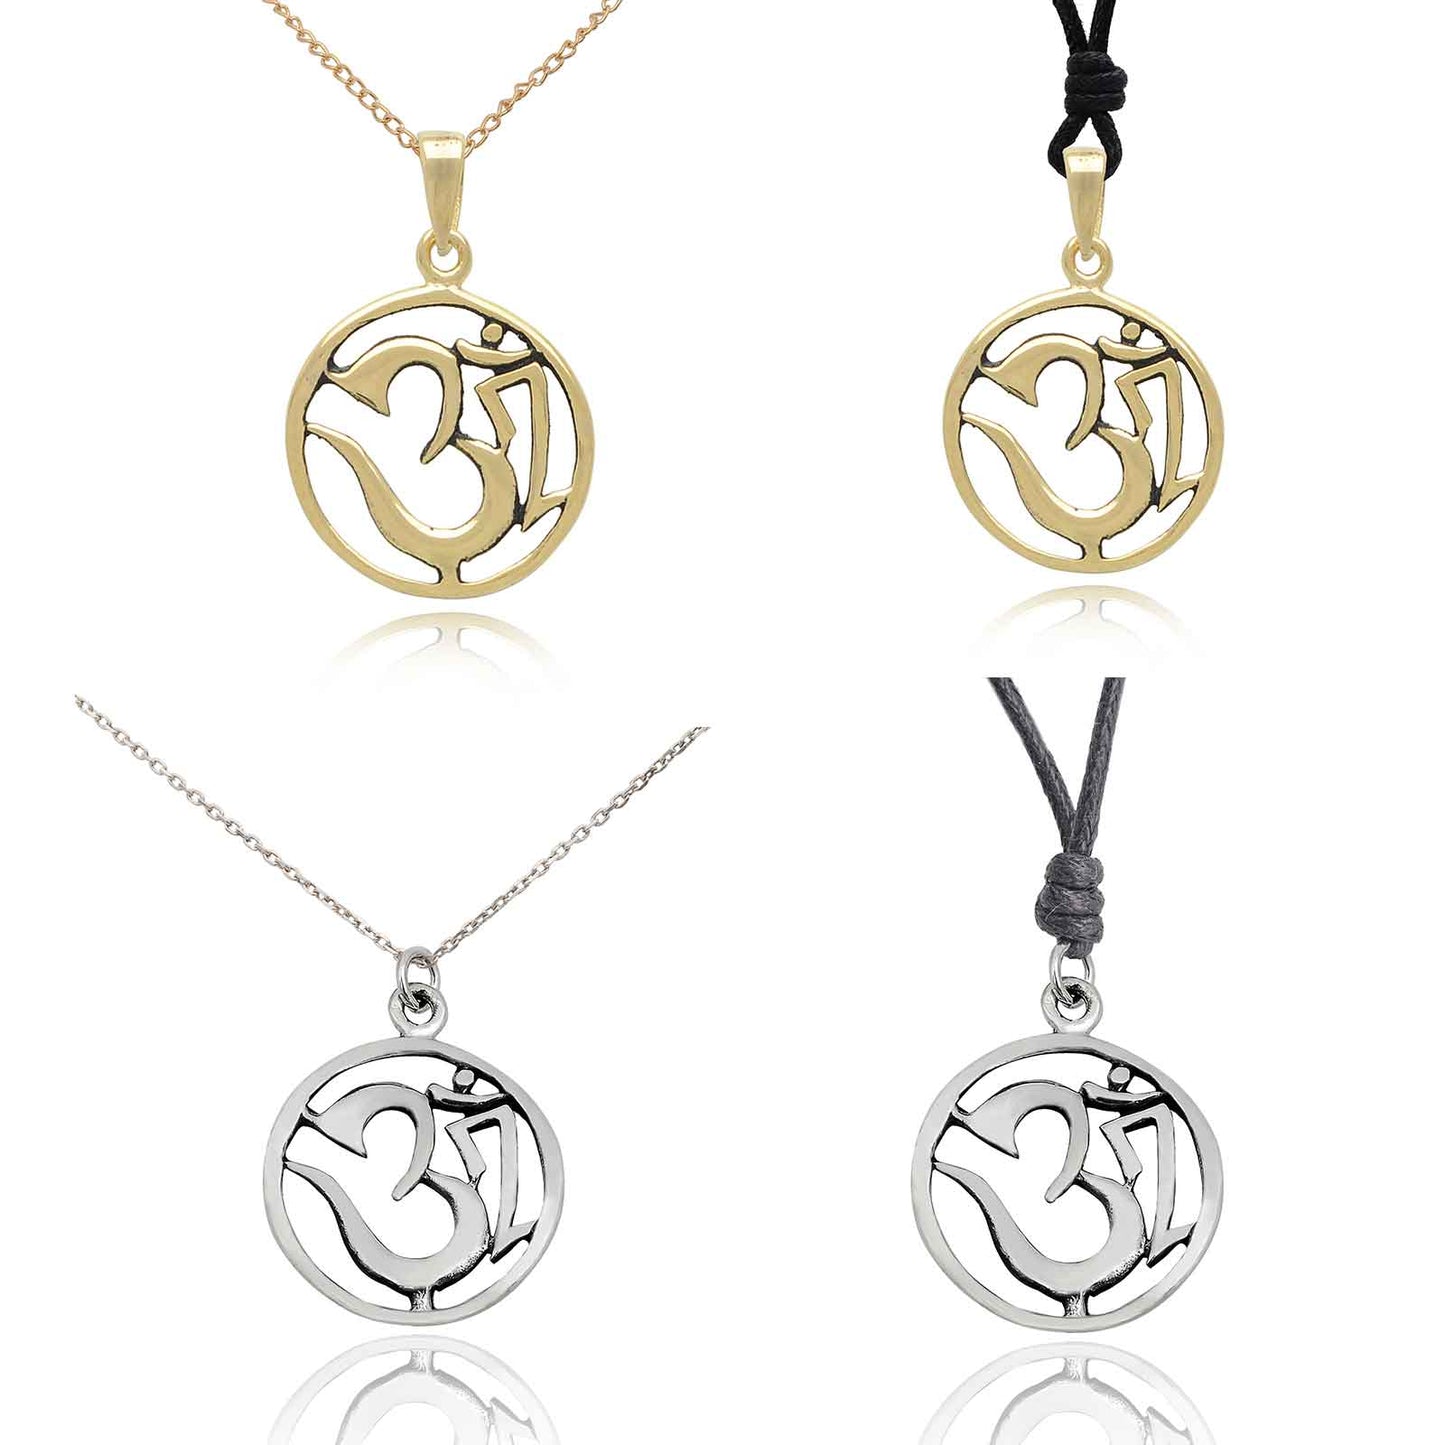 Hindu Aum Ohm Om 92.5 Sterling Silver Pewter Brass Charm Necklace Pendant Jewelry